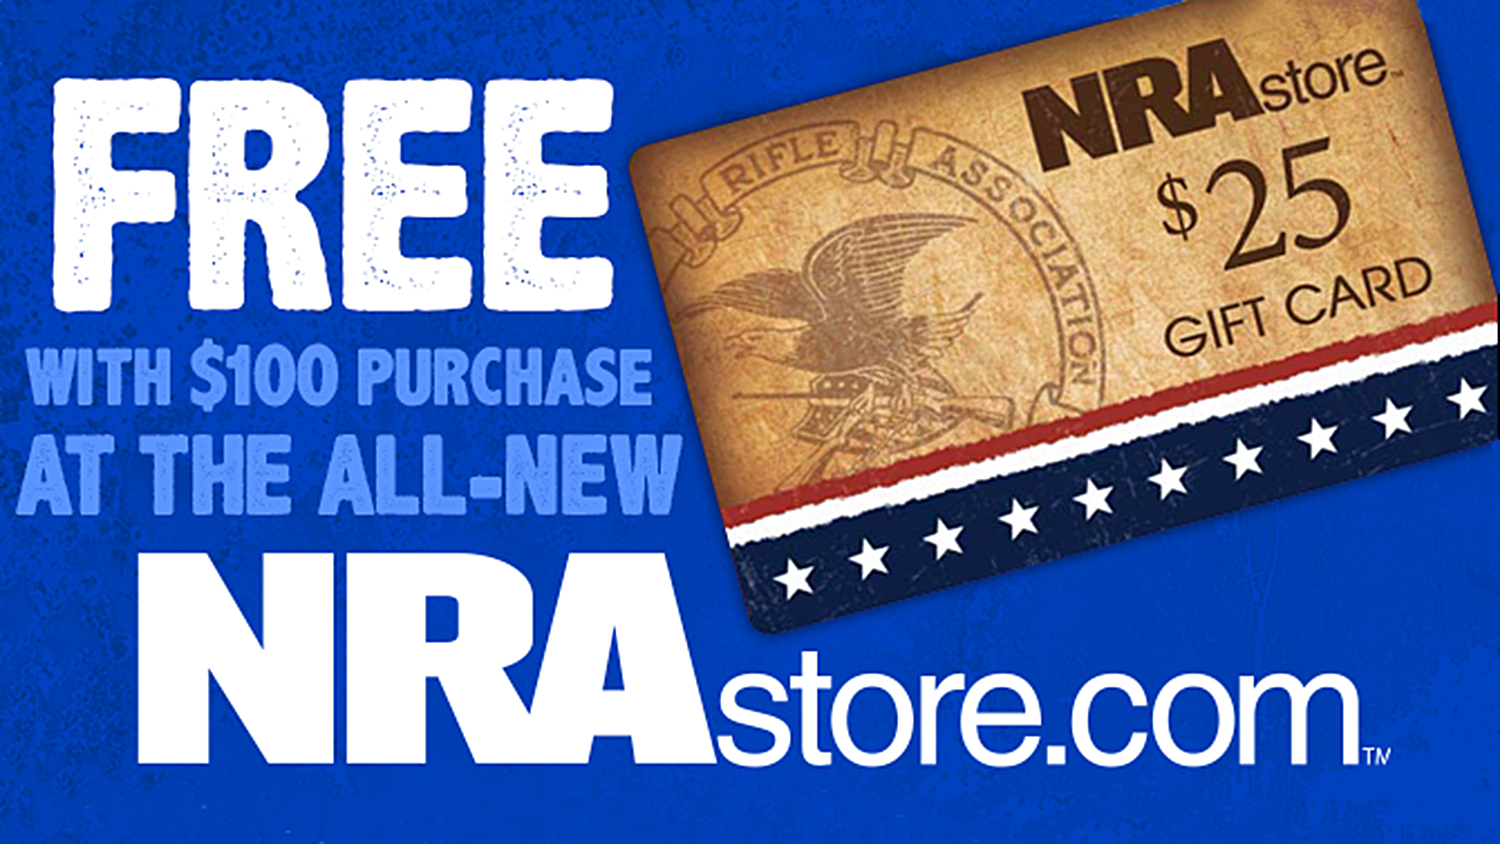 $25 Gift Card With Order of $100 or More on NRAstore.com